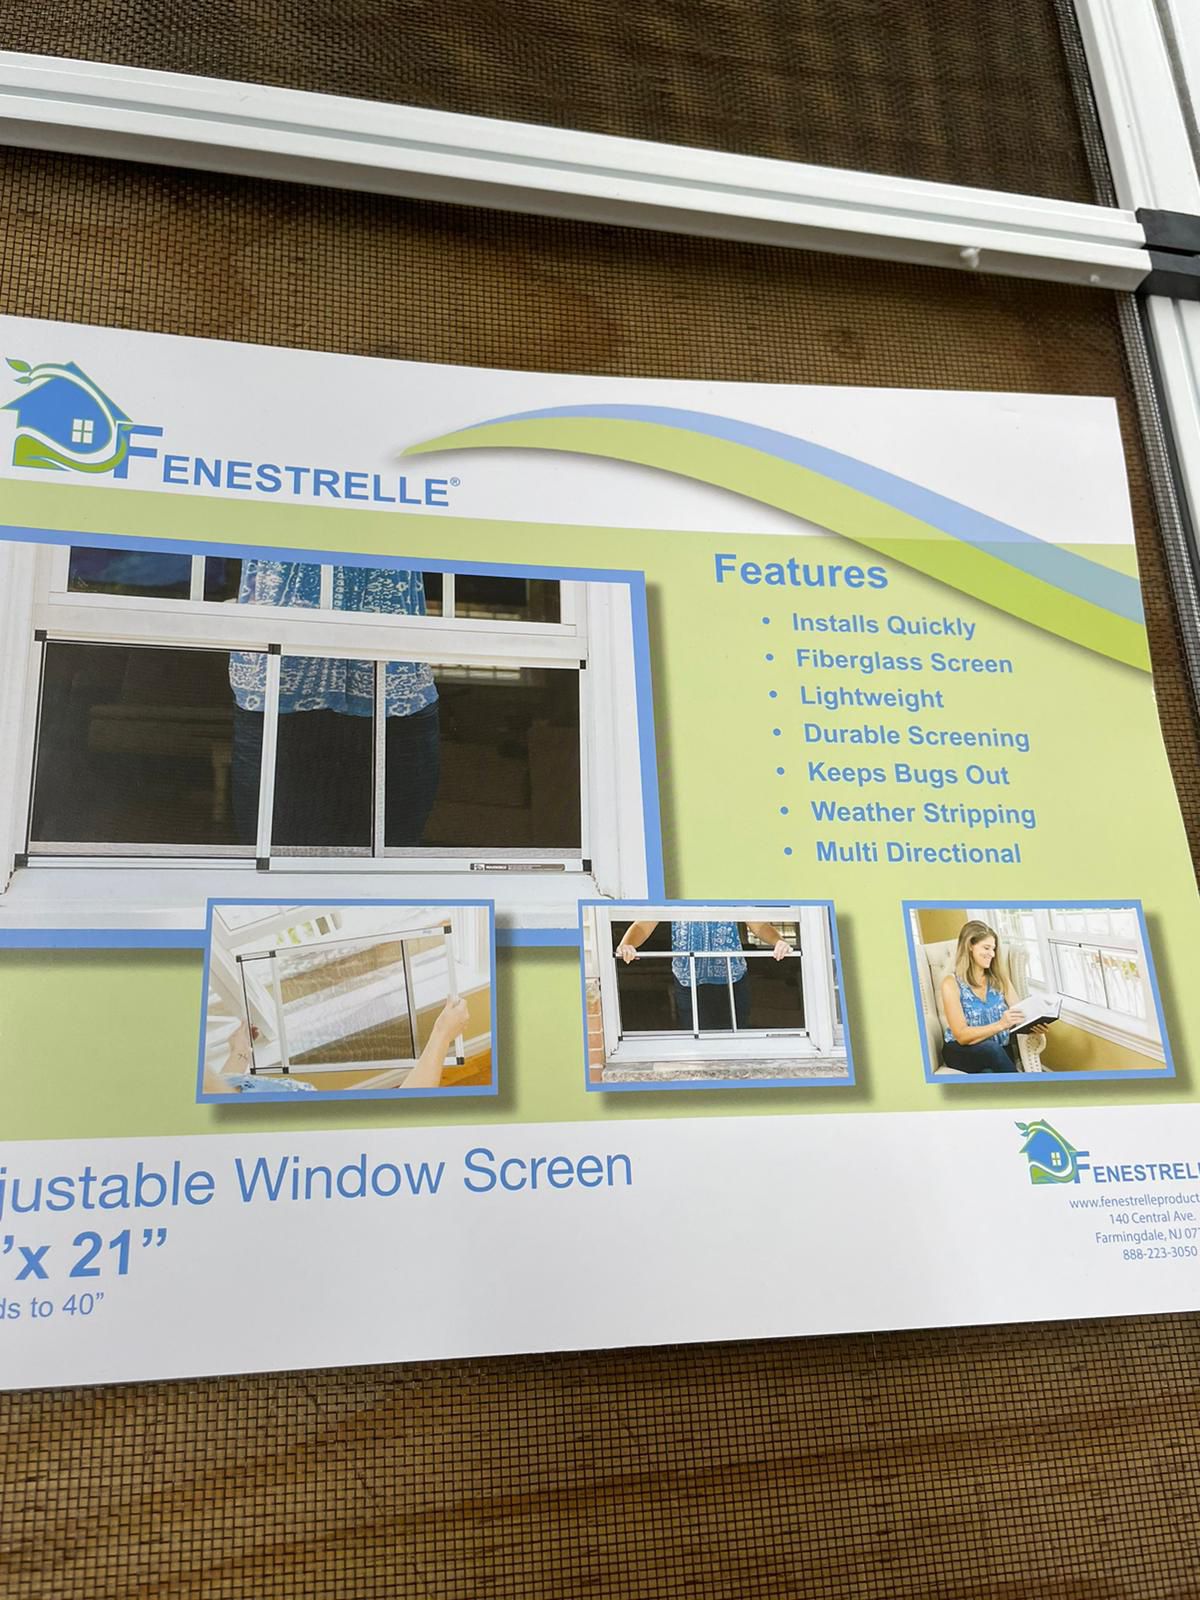 Fenestrelle Expandable Window Screen, 2 Way Adjustable, Horizontal (15"H x 21" - 40"W) or Convert to Vertical (21"H x 15" - 28"W), Perfect Replacement